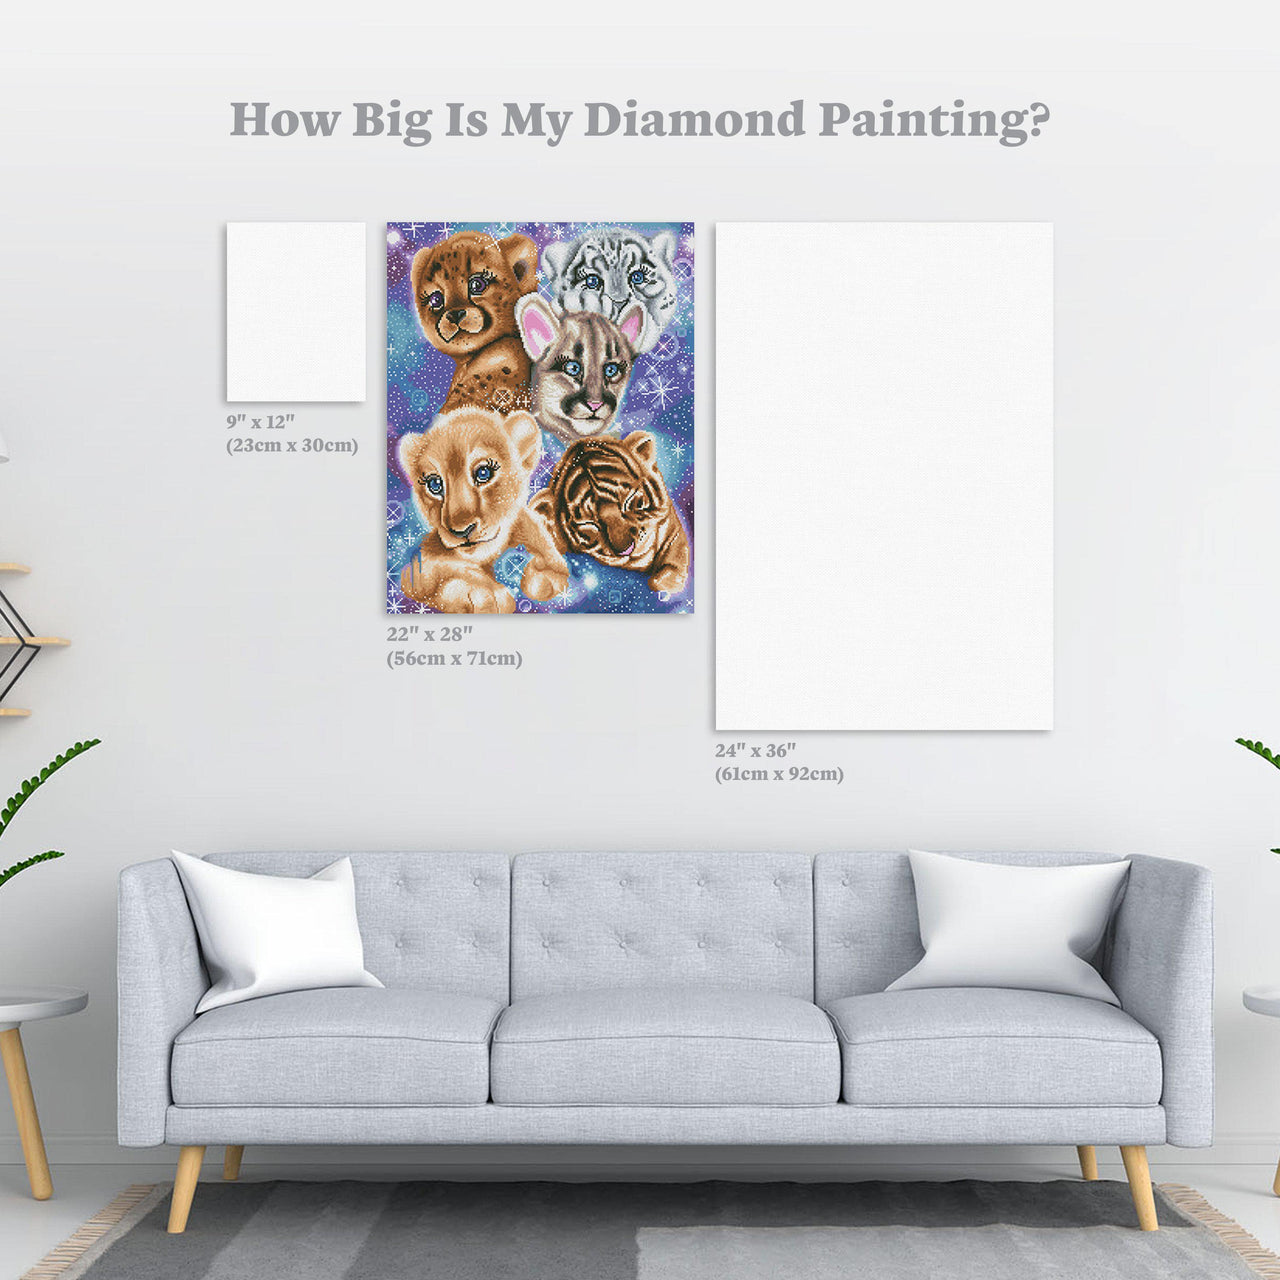 Diamond Painting Galaxy Wild Kitten Cubs 22" x 28″ (56cm x 71cm) / Round with 44 Colors including 1 AB / 49,897